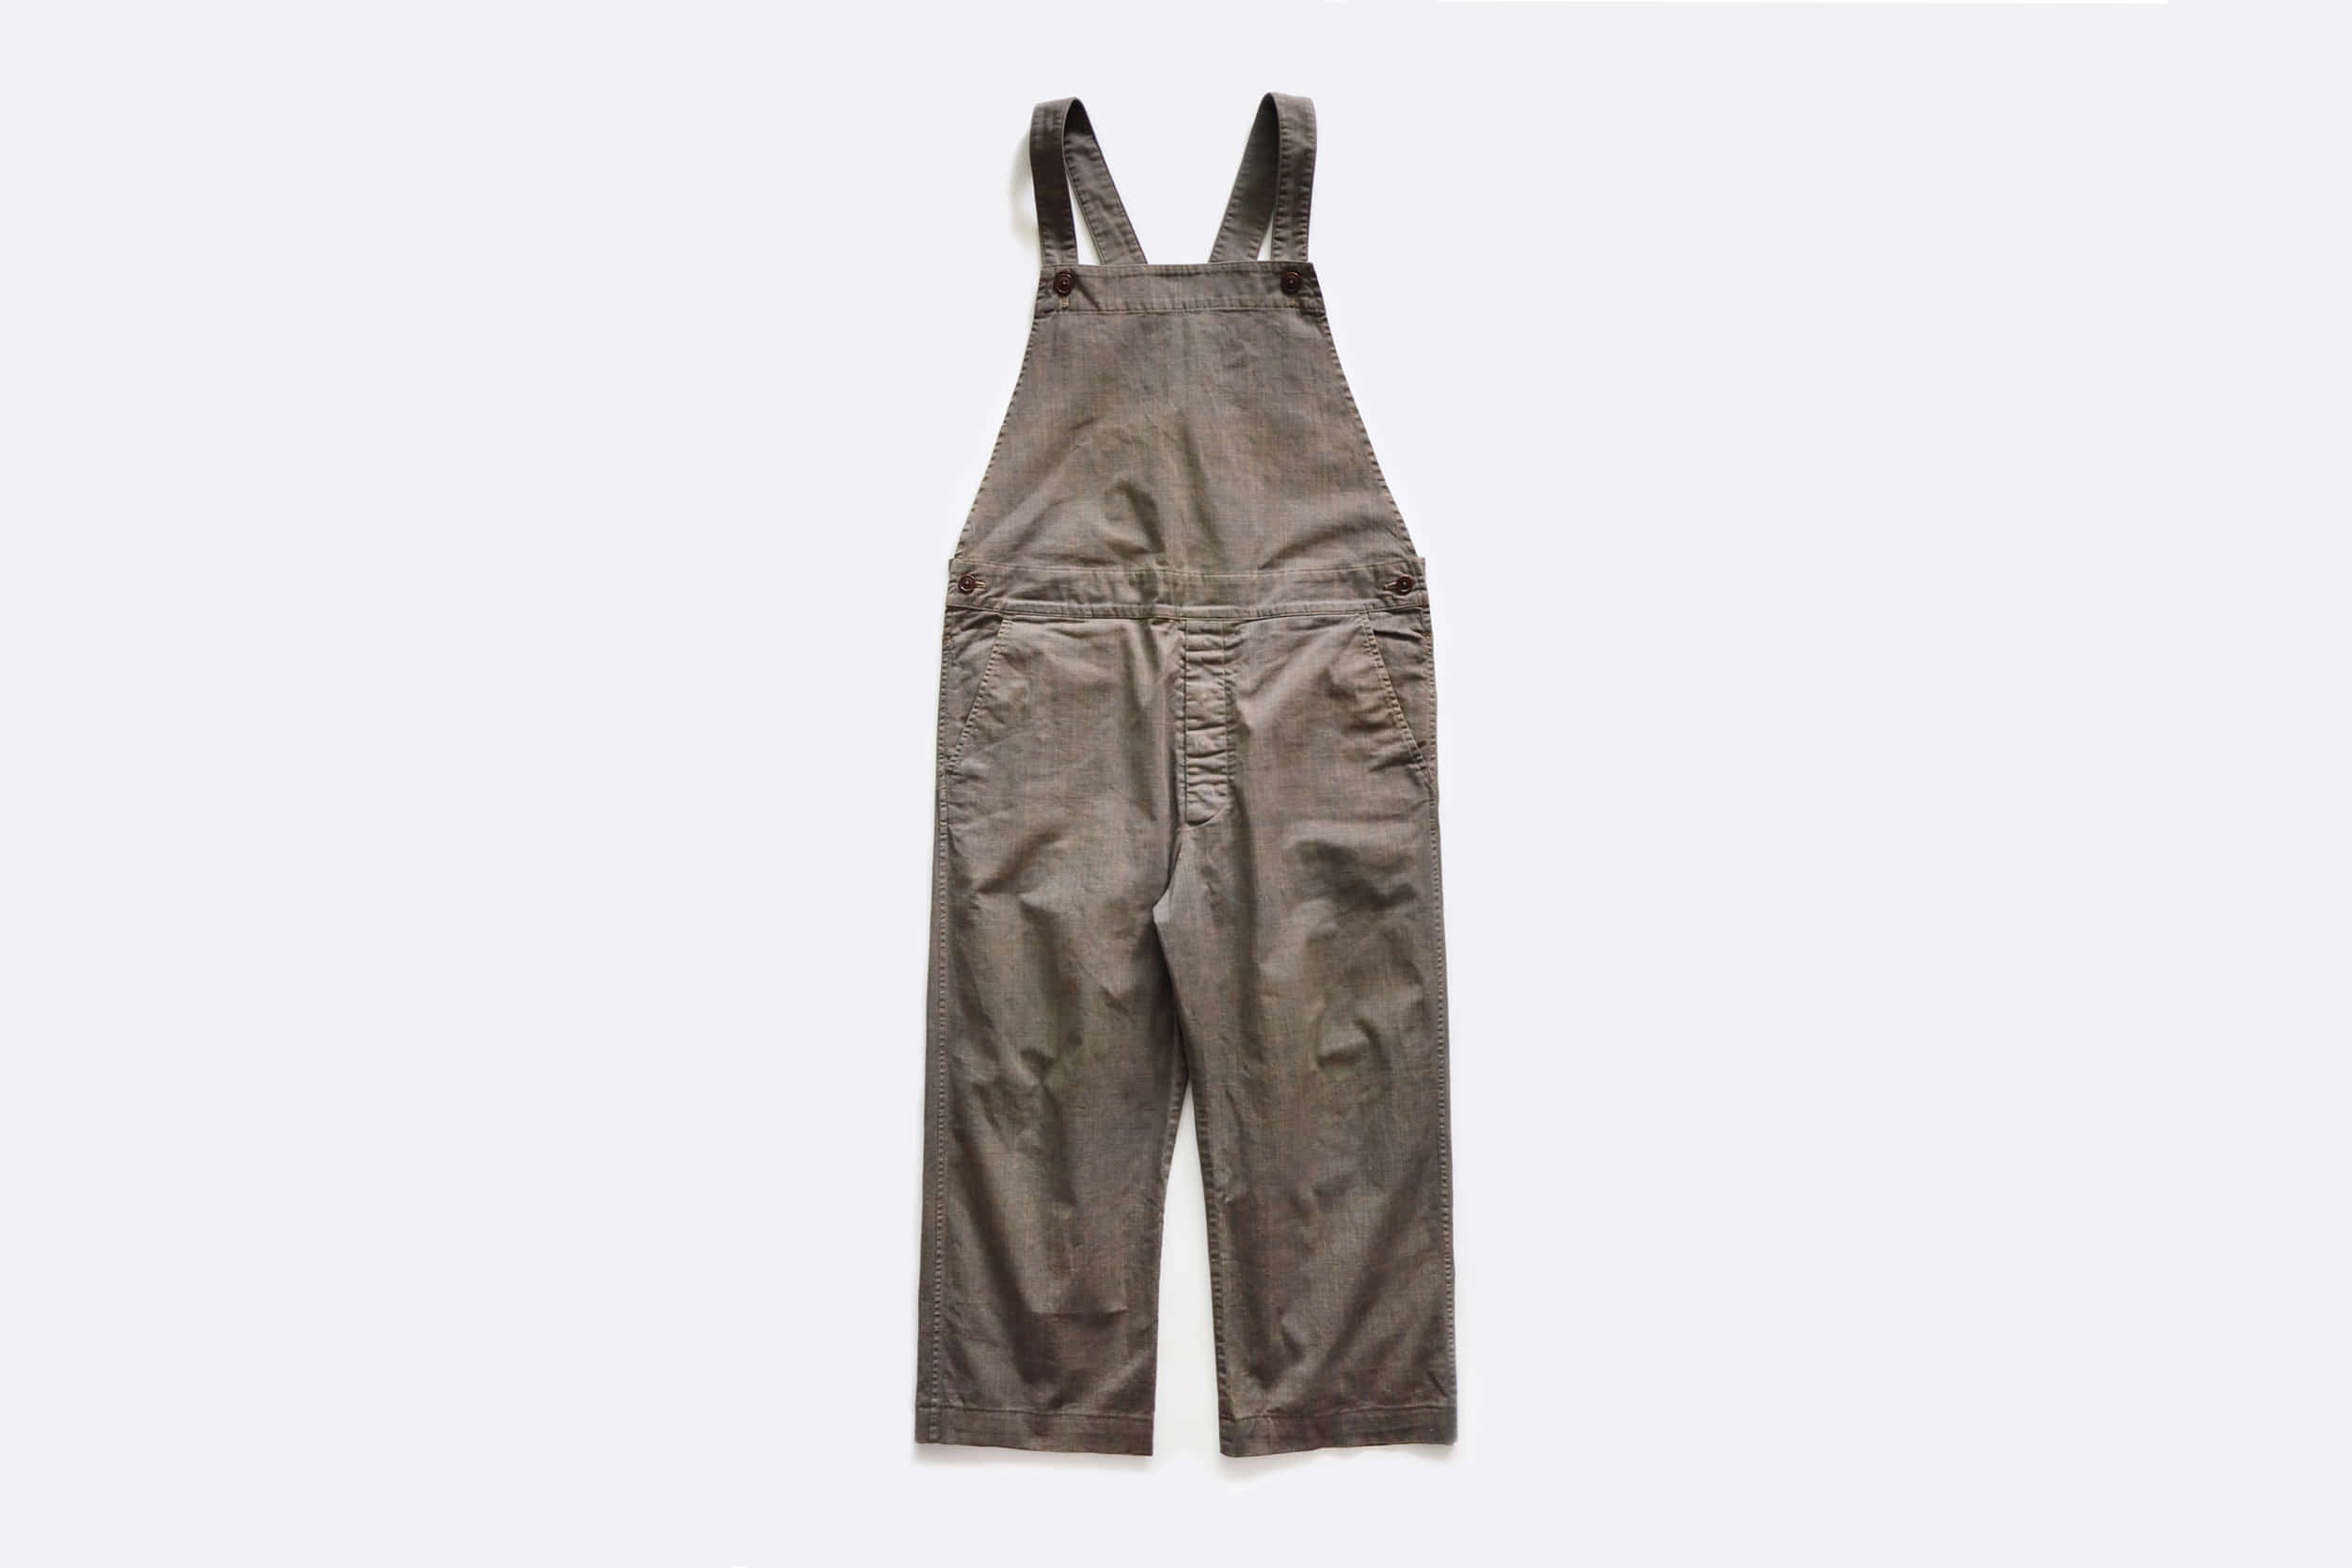 ts(s)  Old style bib overalls